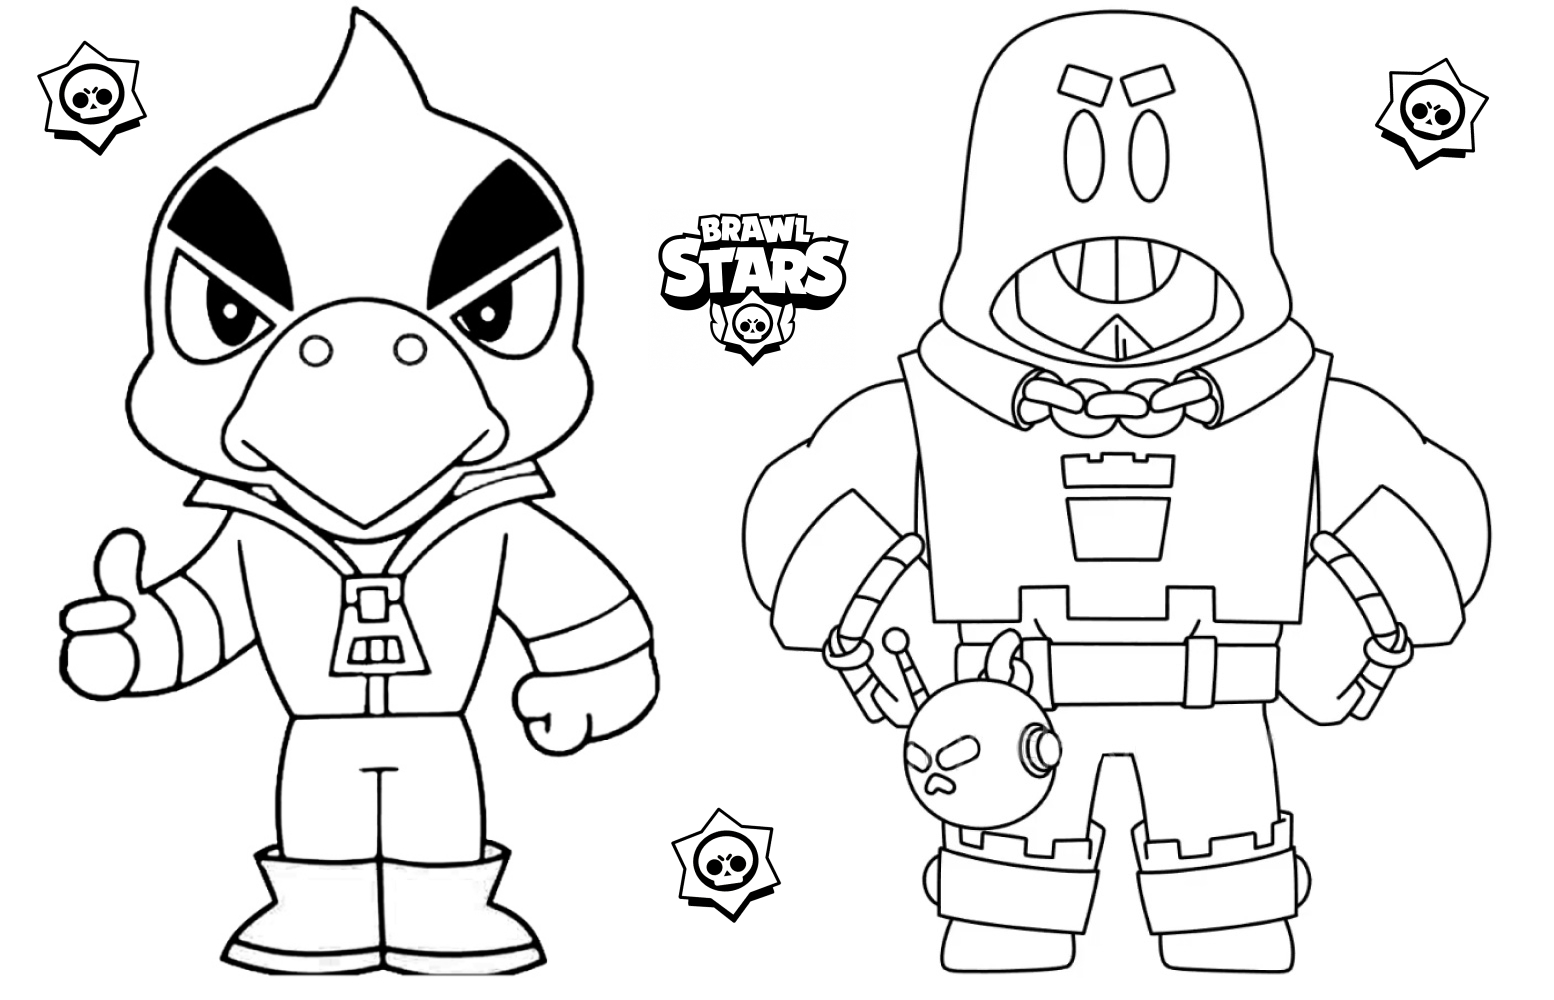 Coloring page Brawl Stars Grom and Crow